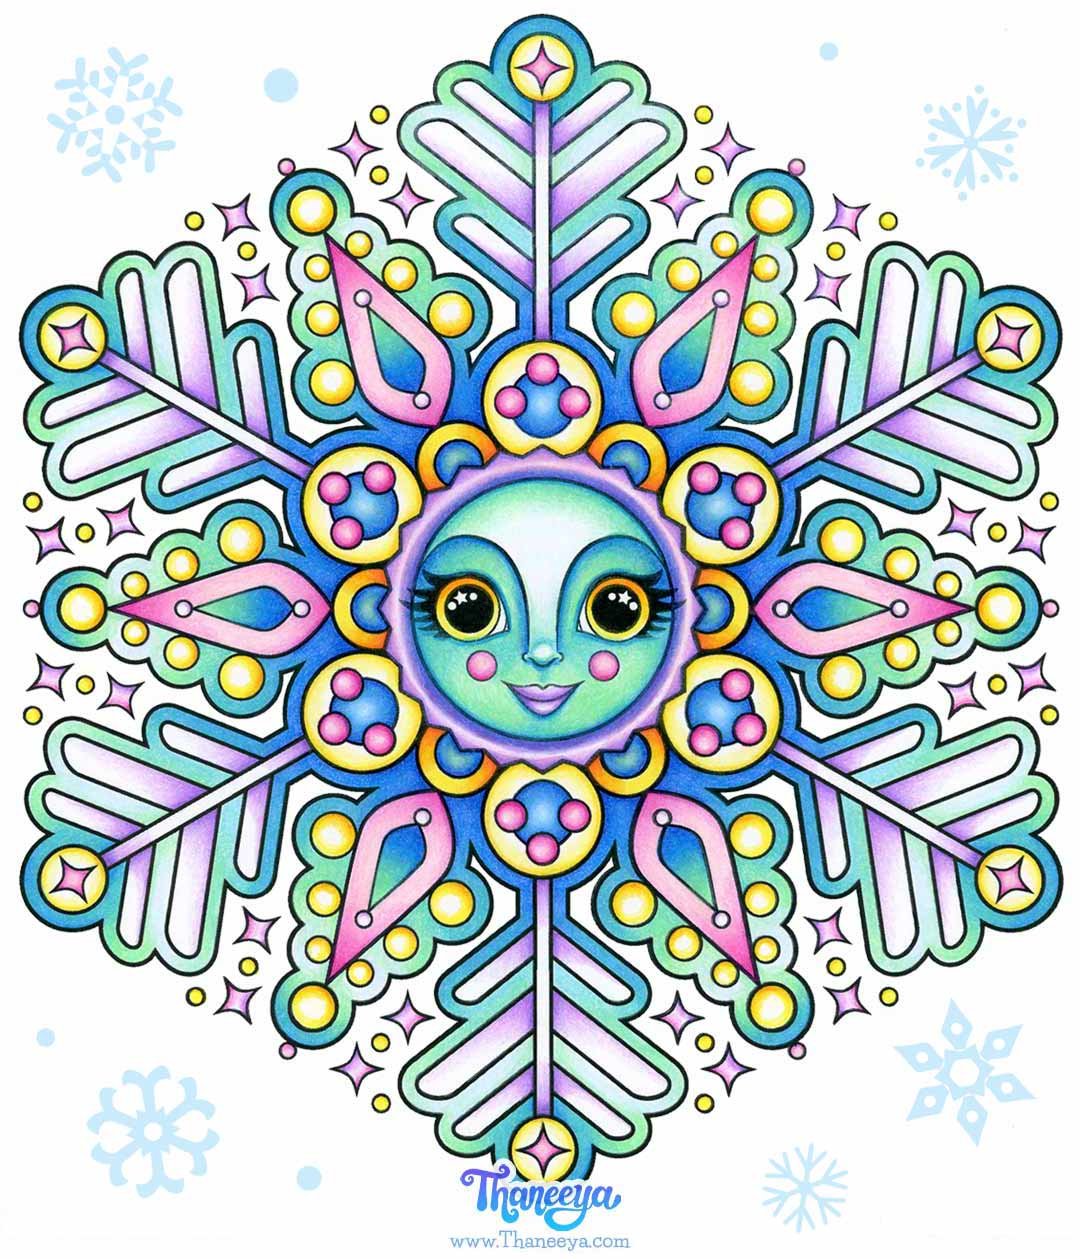 Cute Snowflakes Coloring Pages by Thaneeya McArdle